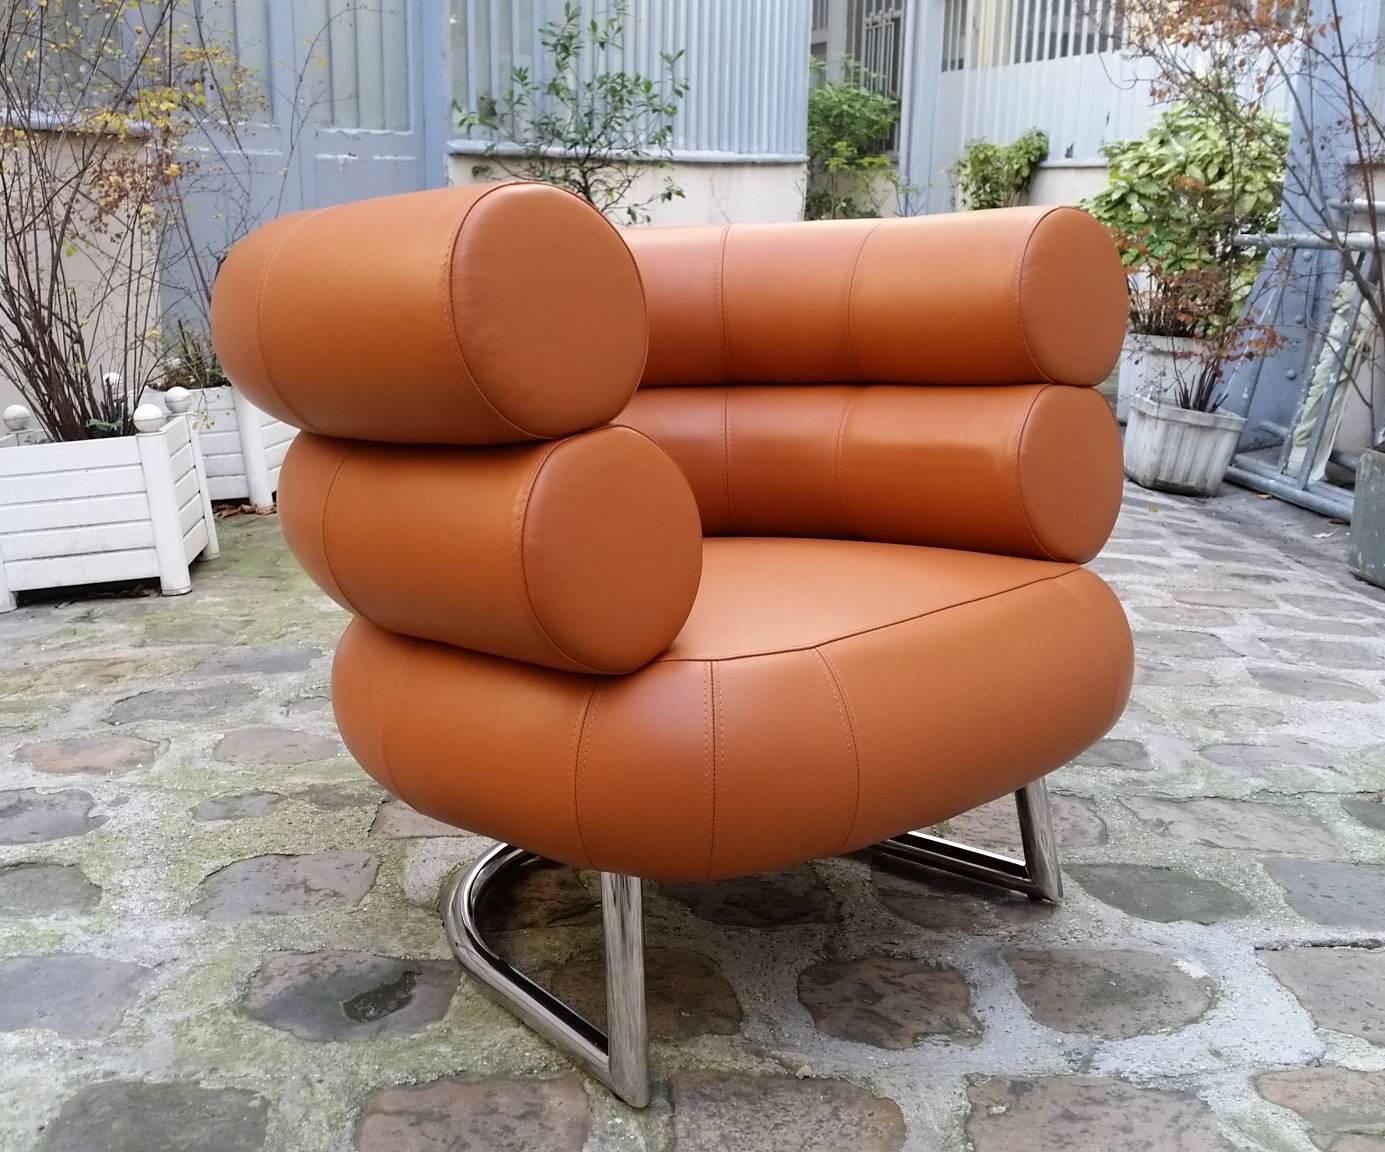 Designed by Eileen Gray, one of the most outstanding designers of her time, Bibendum is a chair reissued by Classicon that was originally designed for the furnishing of the villa E 1027 in a very innovative and singular style. Despite its large